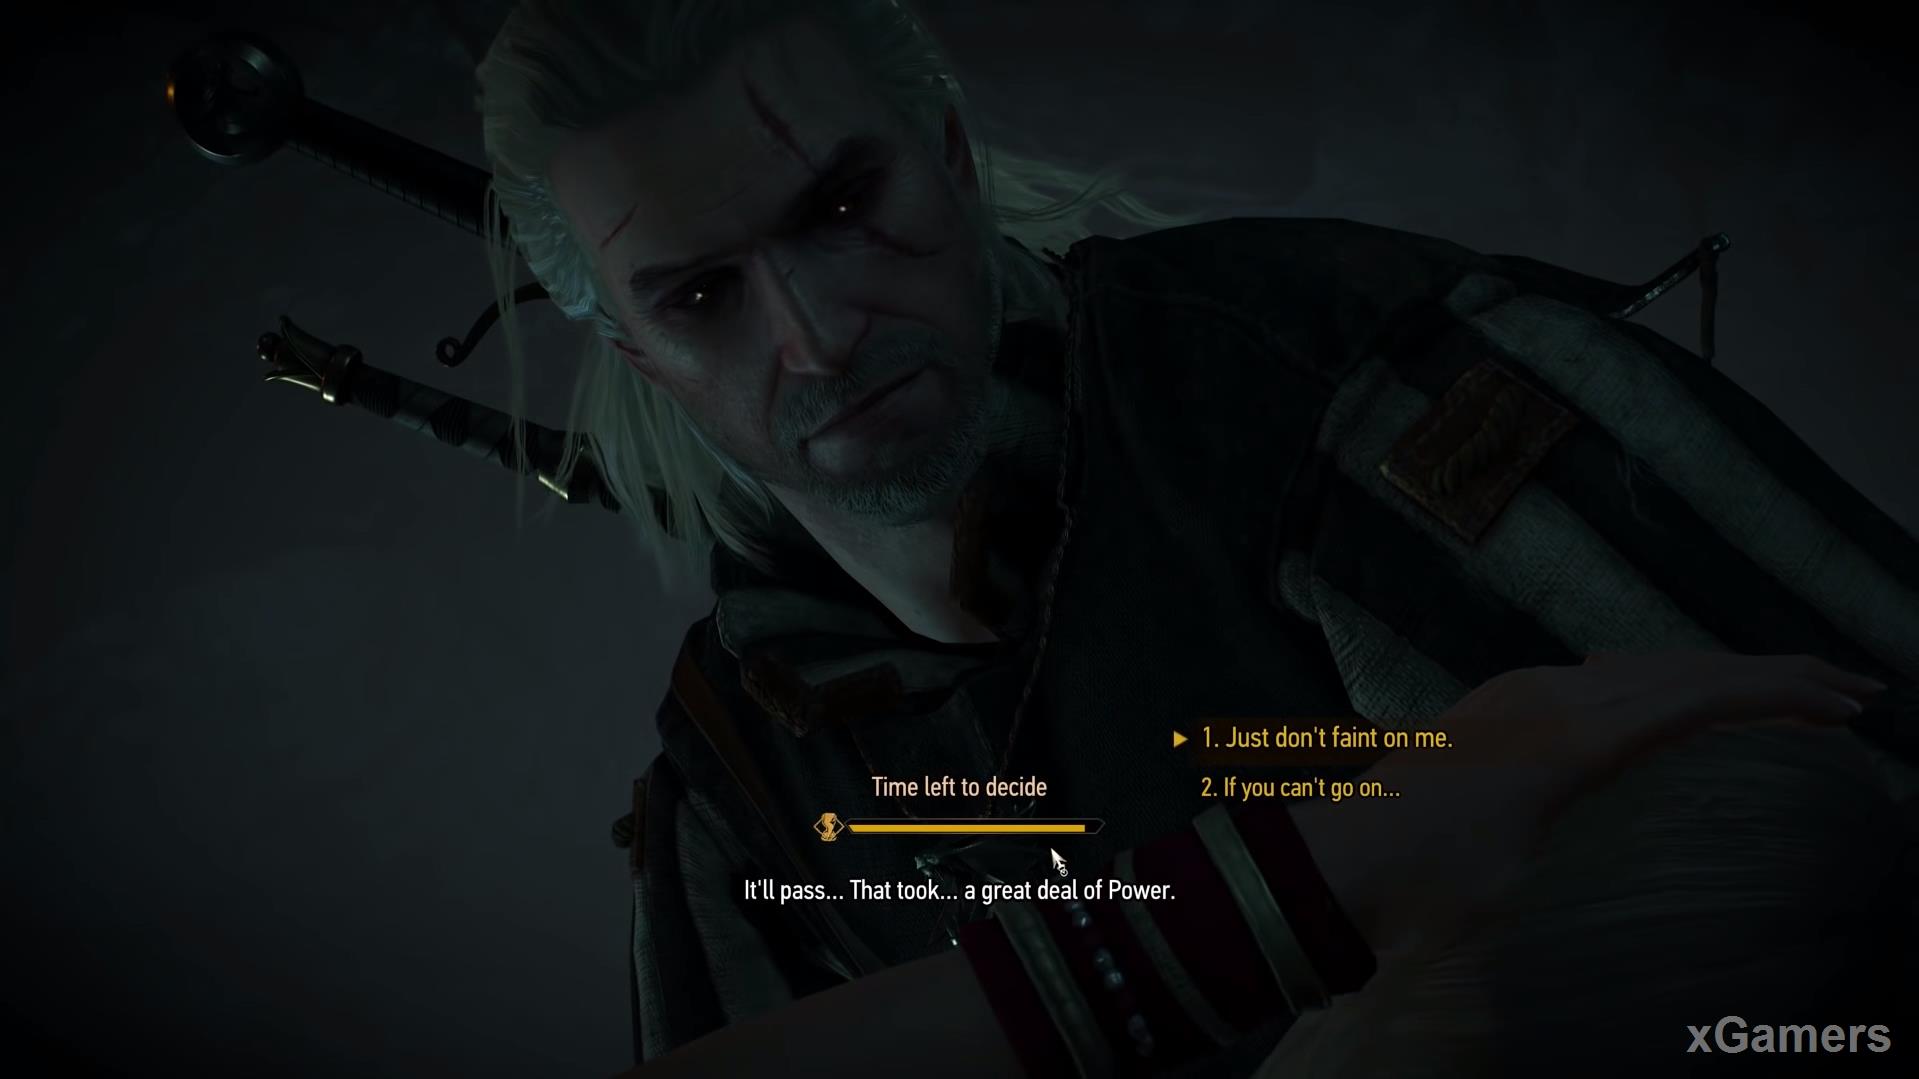 Keira will spend a lot of effort and a dialogue will begin, where Geralt can improve his relationship